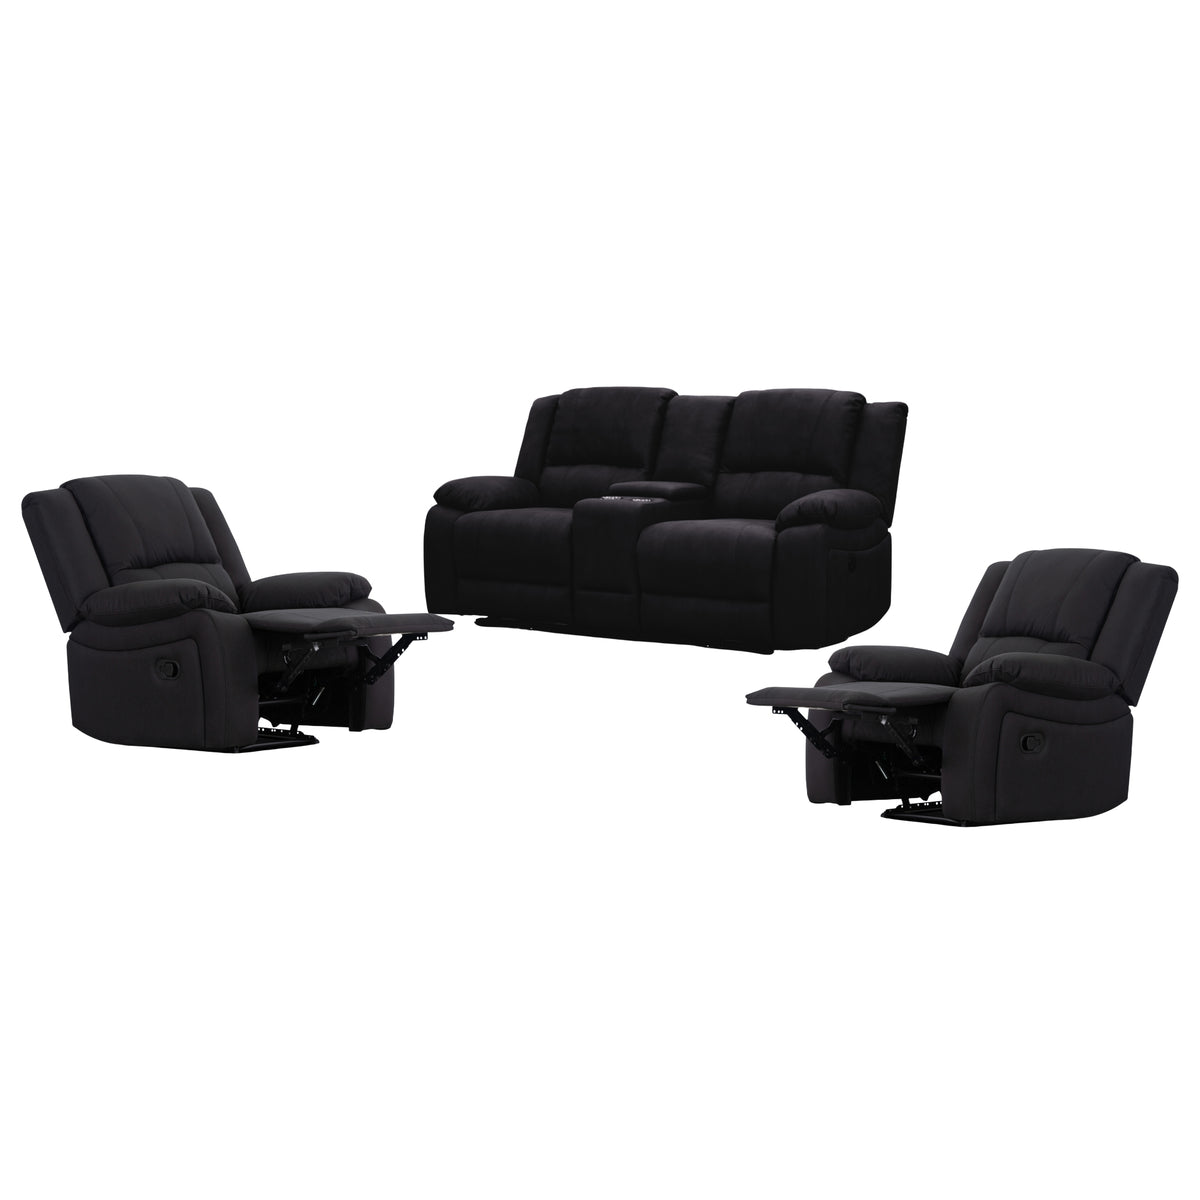 Anderson Fabric Electric Recliner Sofa Lounge Chair ONYX Black 1 + 1 + 2 Seater